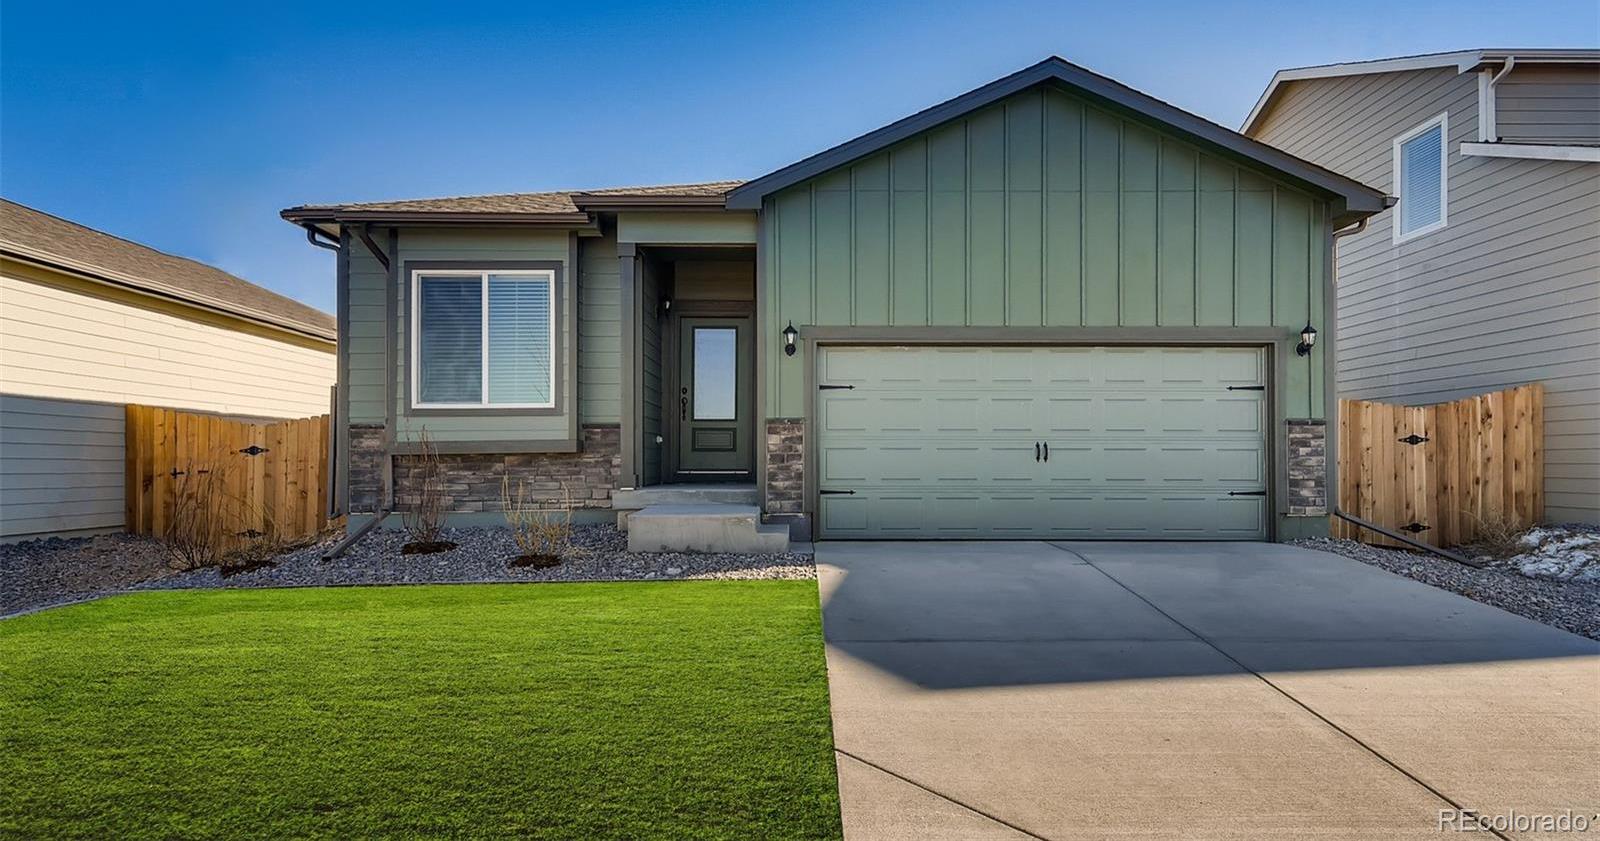 Photo one of 17784 East 94Th Dr Commerce City CO 80022 | MLS 6605162